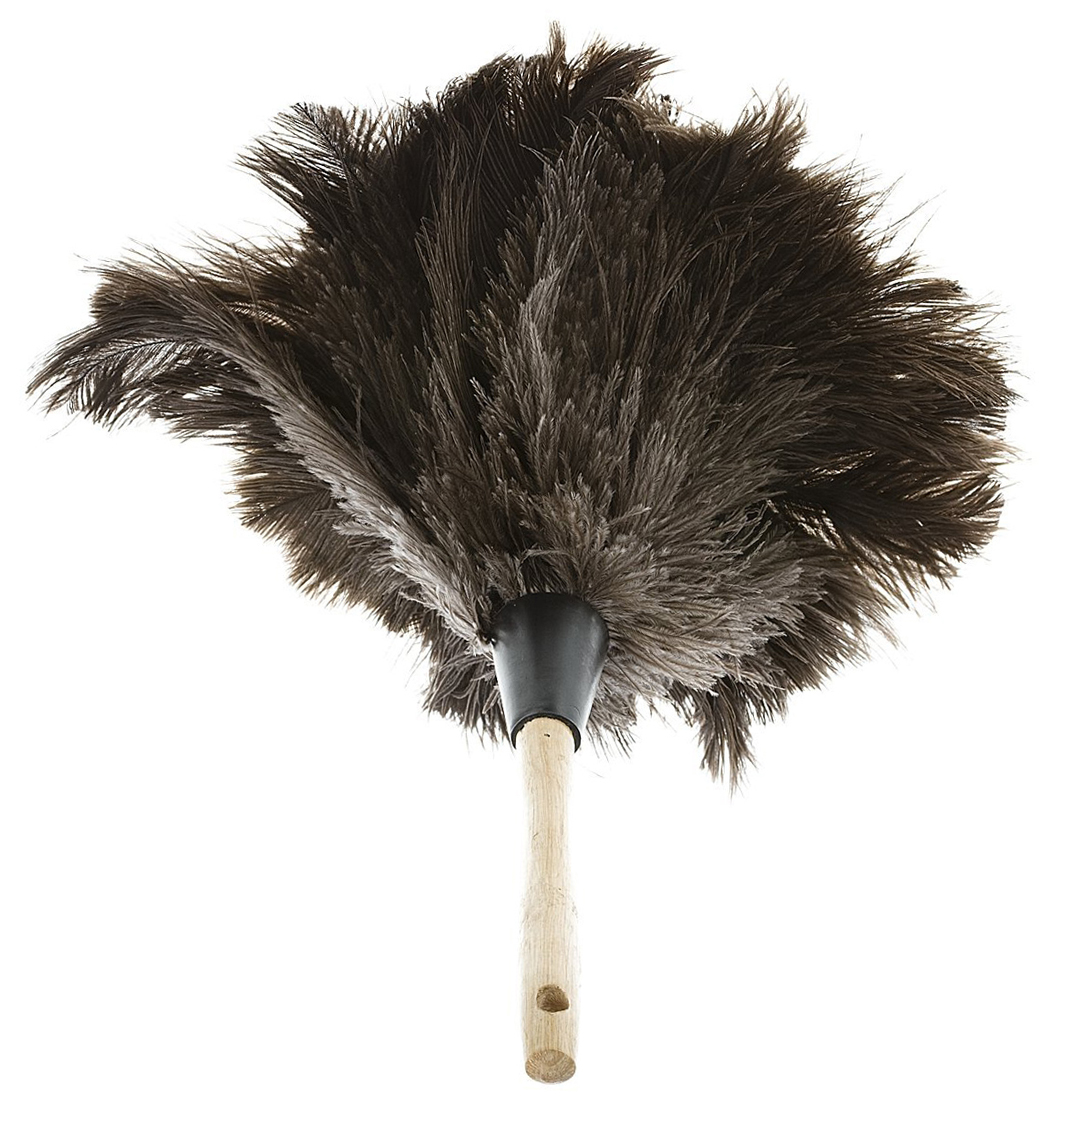 22" Atlas Graham® Ostrich Feather Duster with Wooden Handle